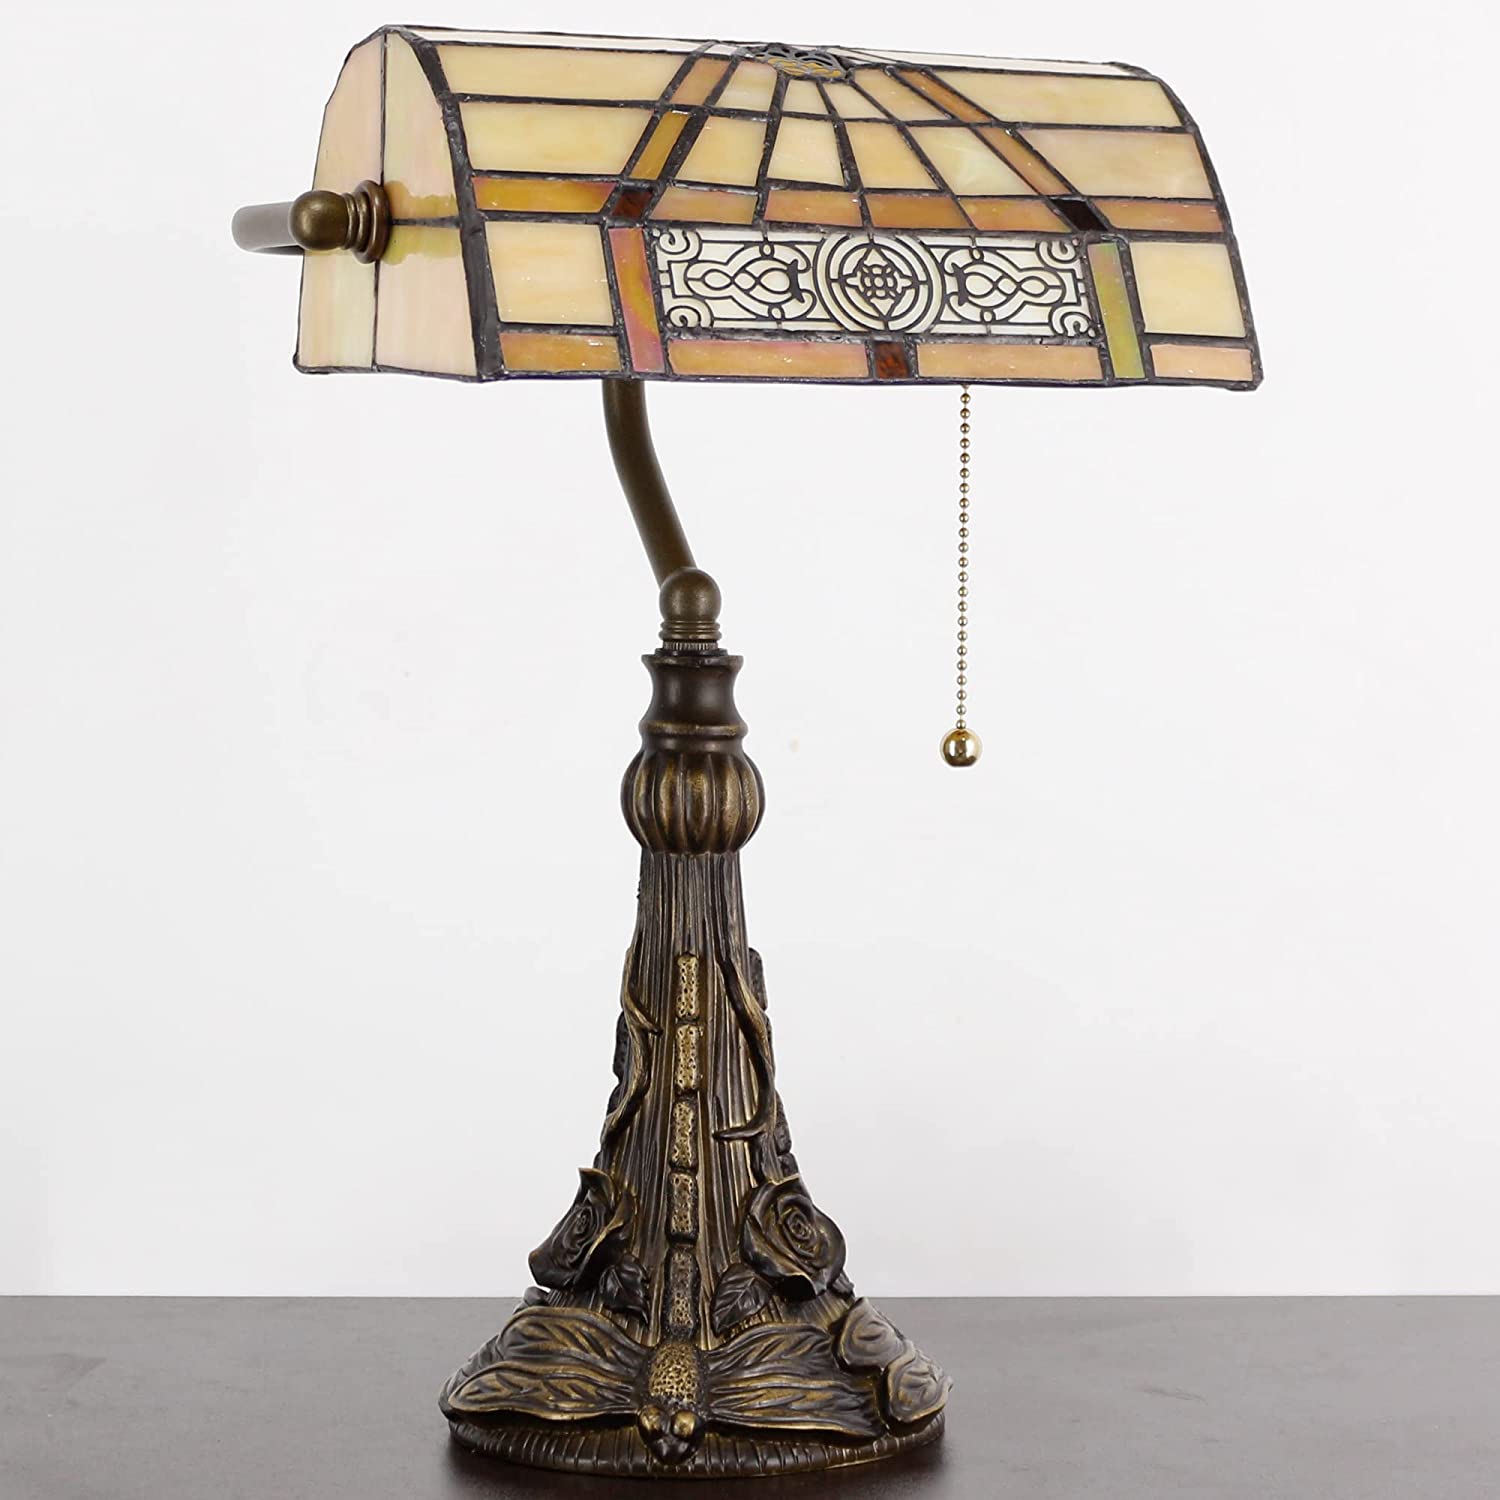 Werfactory® Banker Lamp Tiffany Desk Lamp Victorian Yellow Stained Glass Piano Lamp, 15" Tall